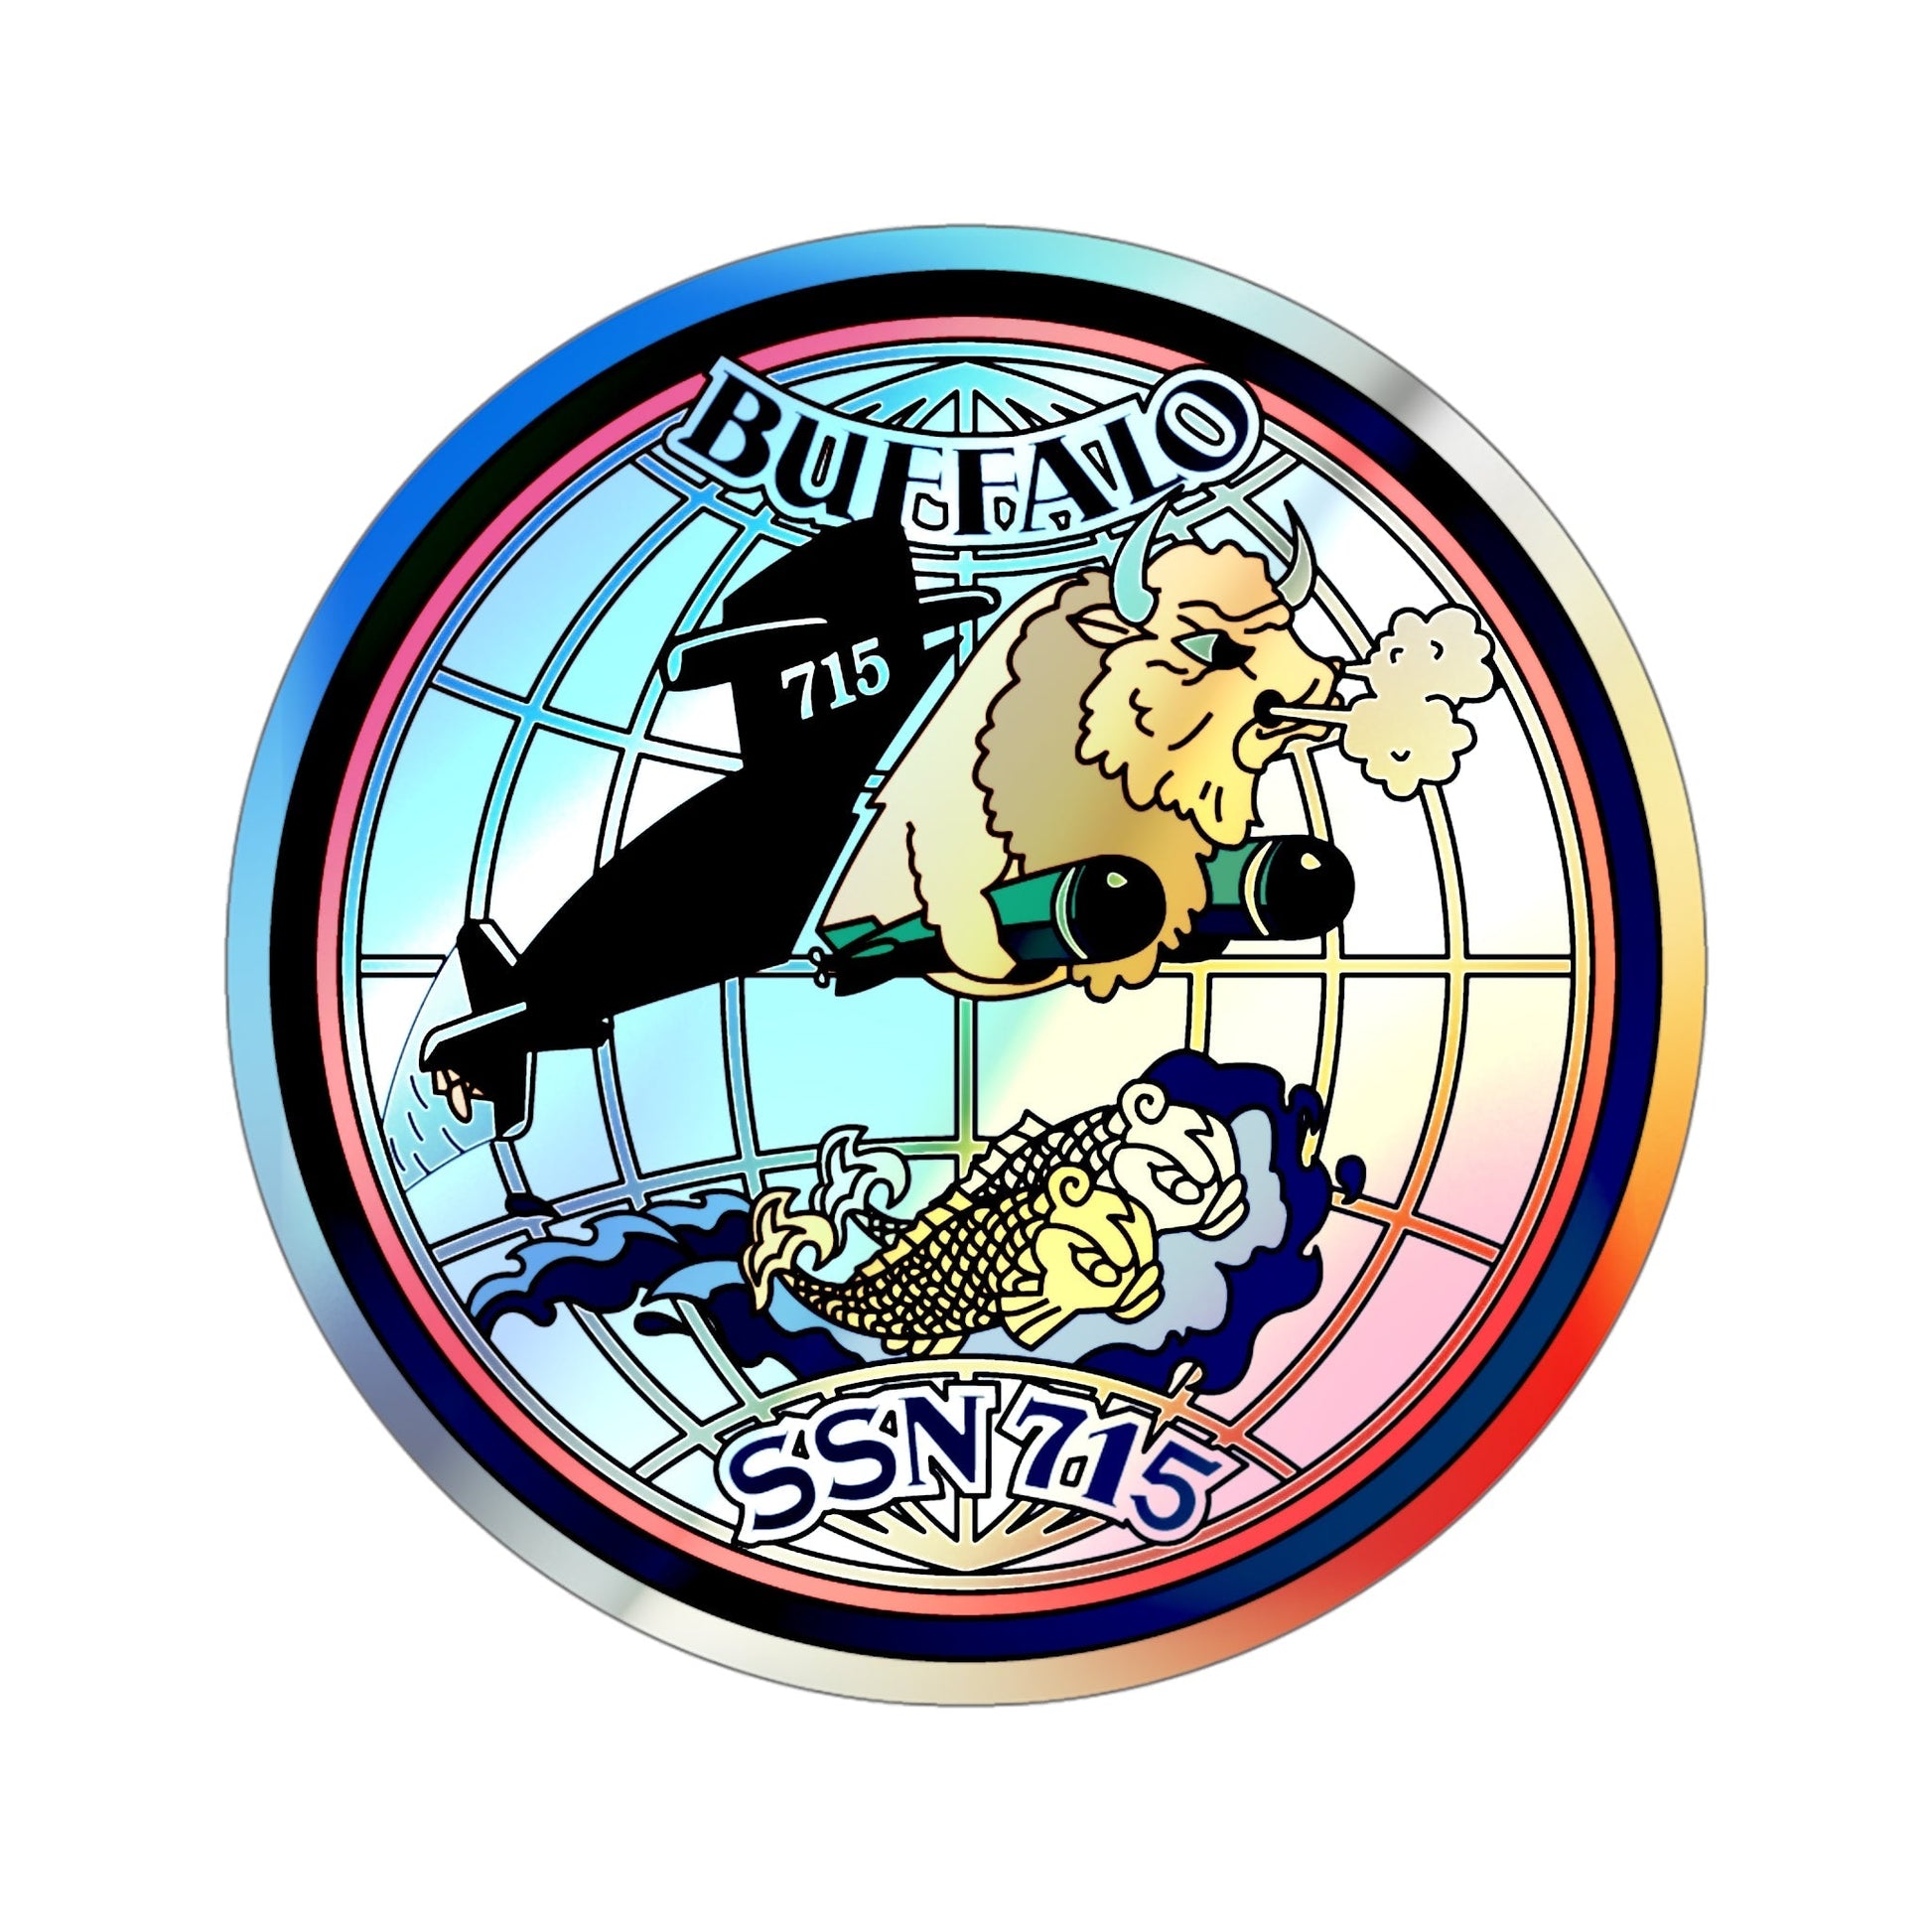 Buffalo SSN 715 (U.S. Navy) Holographic STICKER Die-Cut Vinyl Decal-5 Inch-The Sticker Space